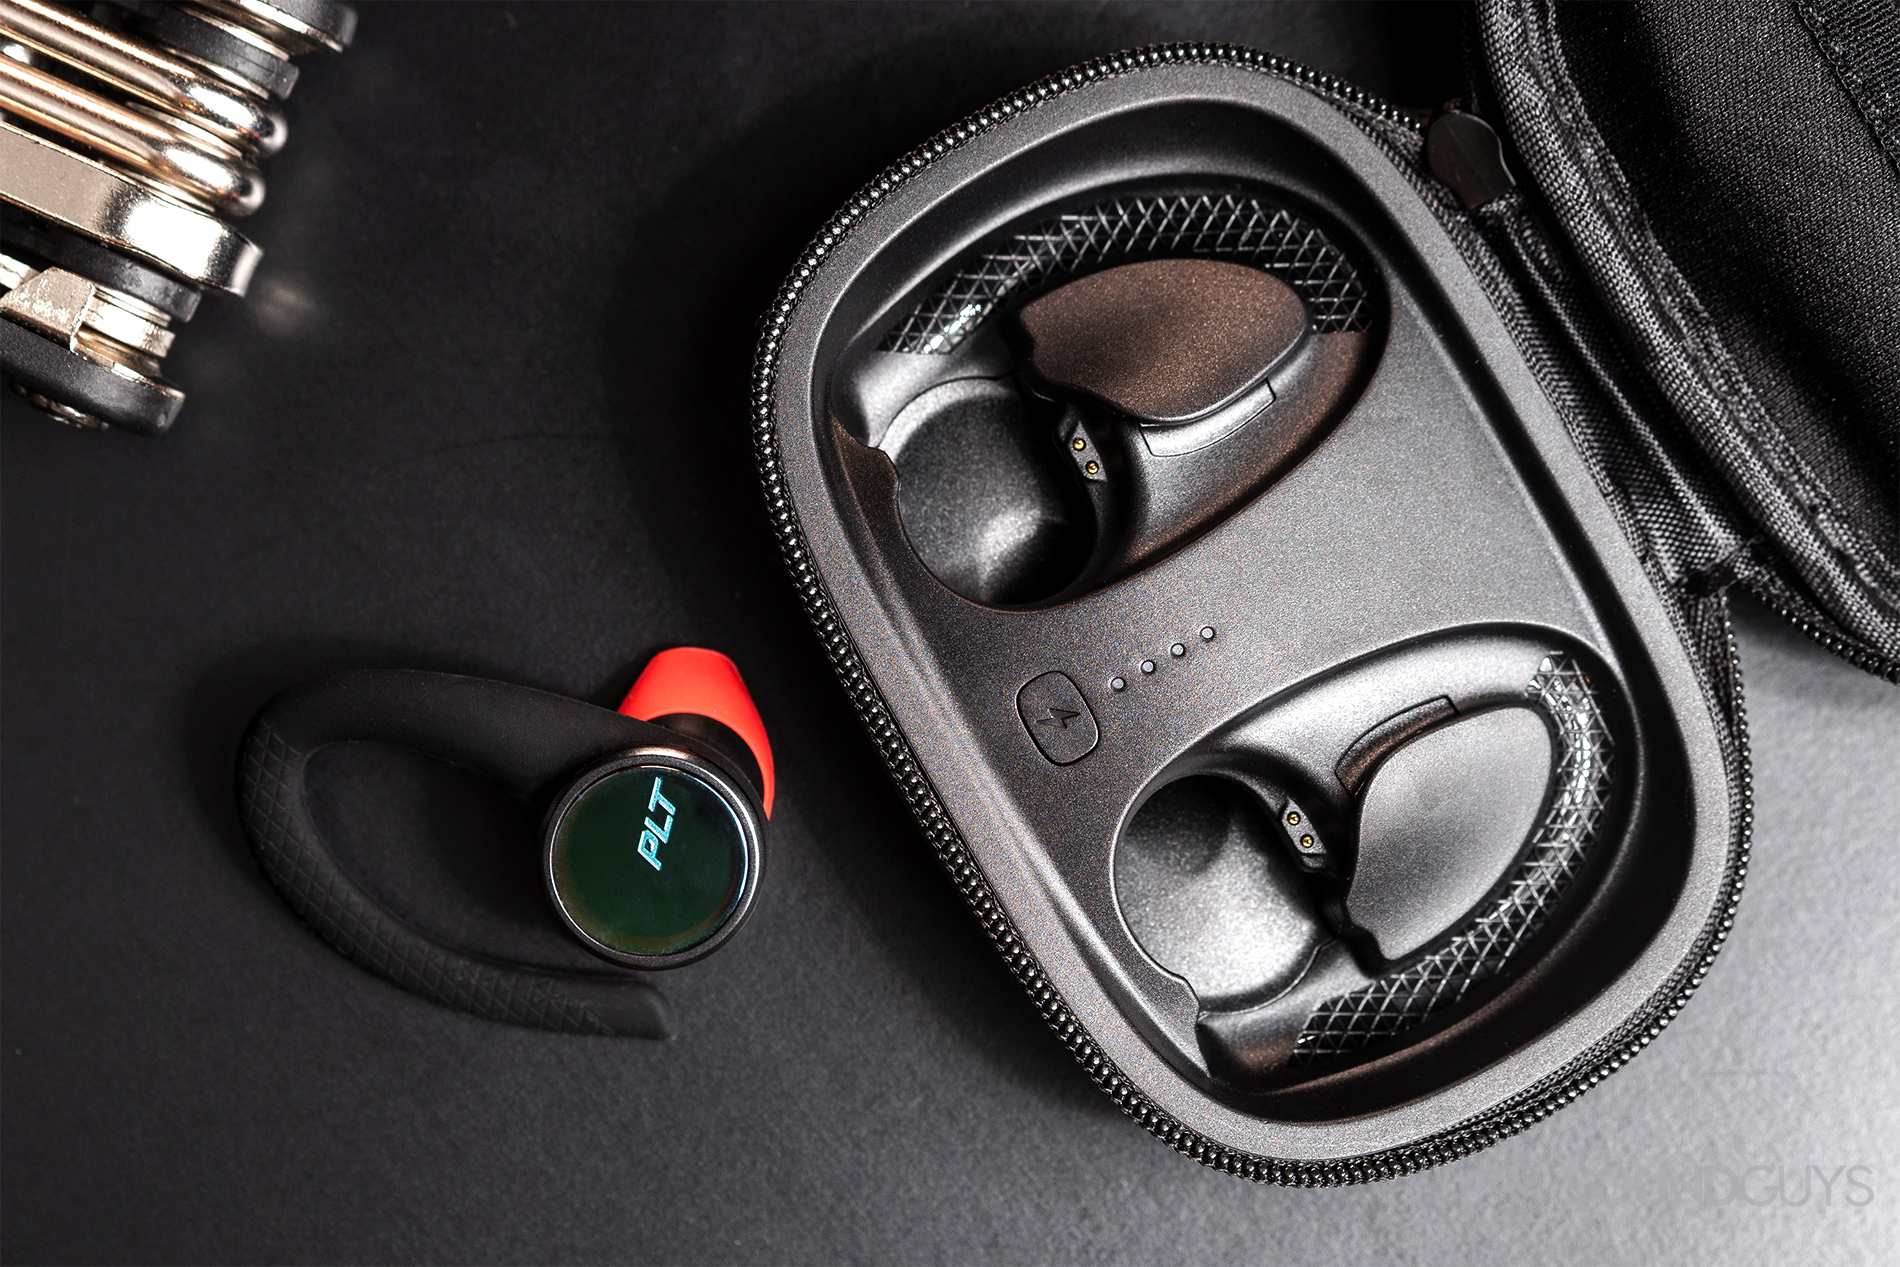 A picture of the Plantronics BackBeat Fit 3100 right earbud next to the open and empty carrying case.